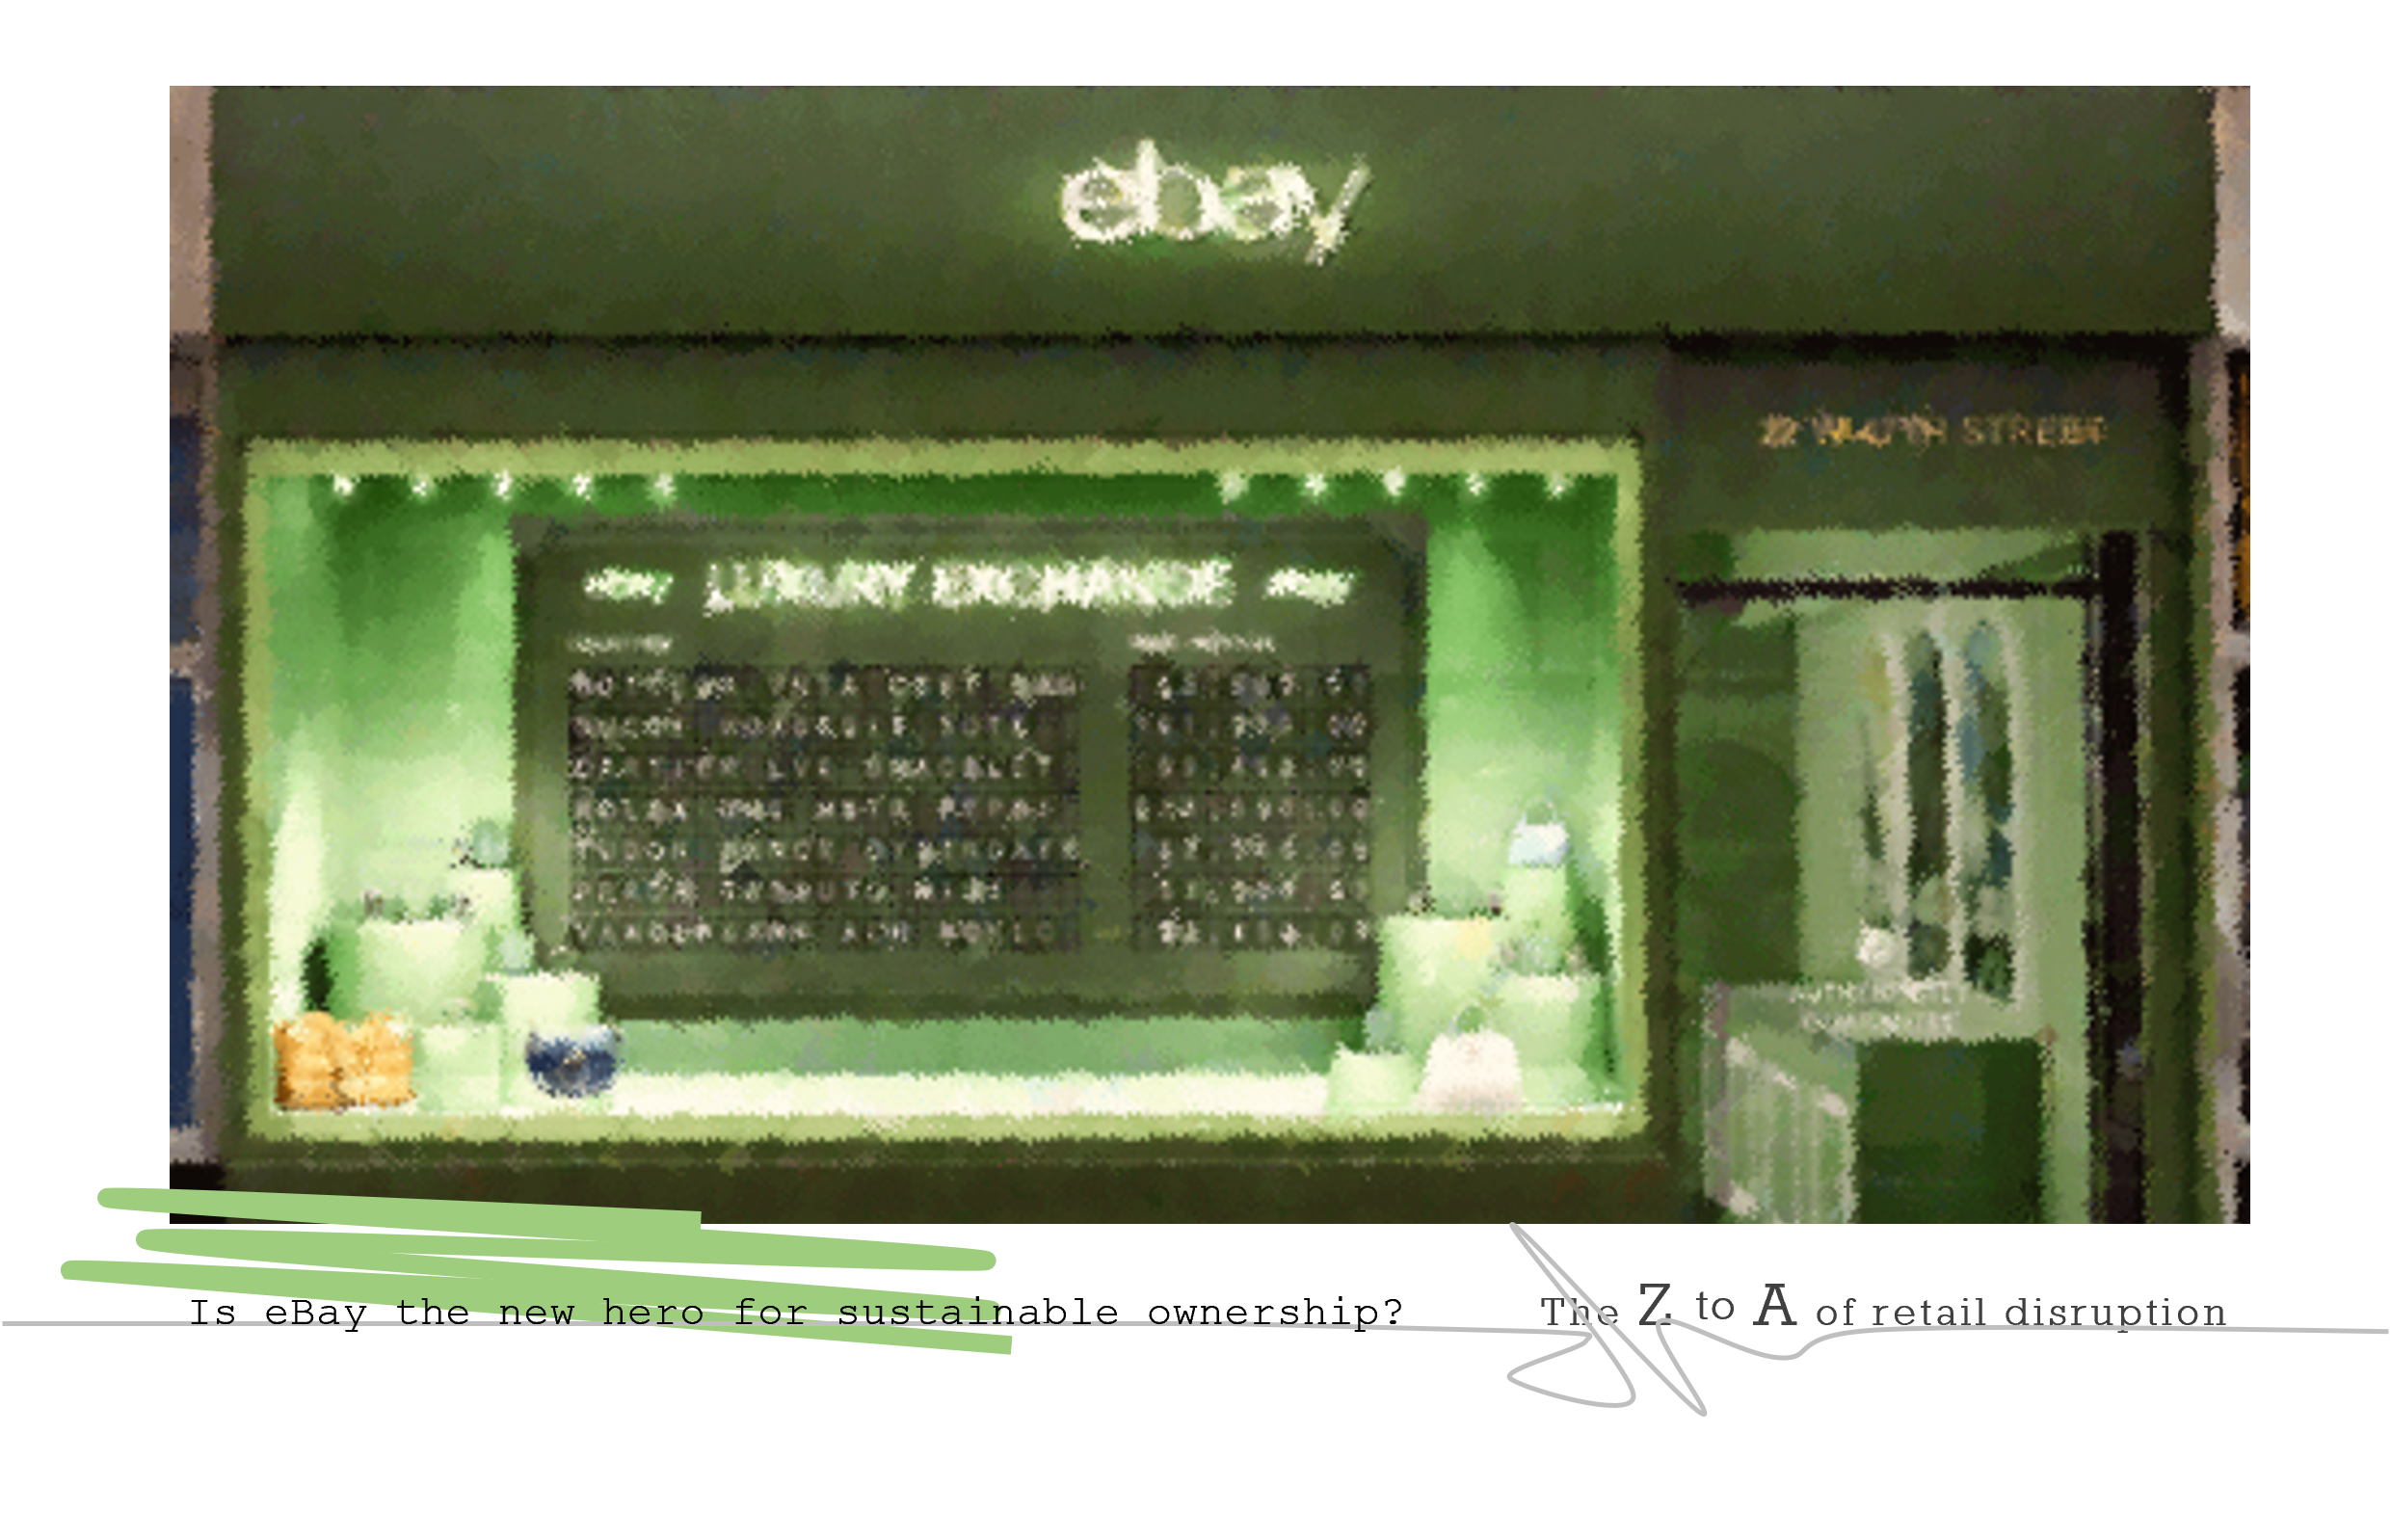 Is eBay and its ‘Luxury Exchange’ the new face of sustainable ownership?